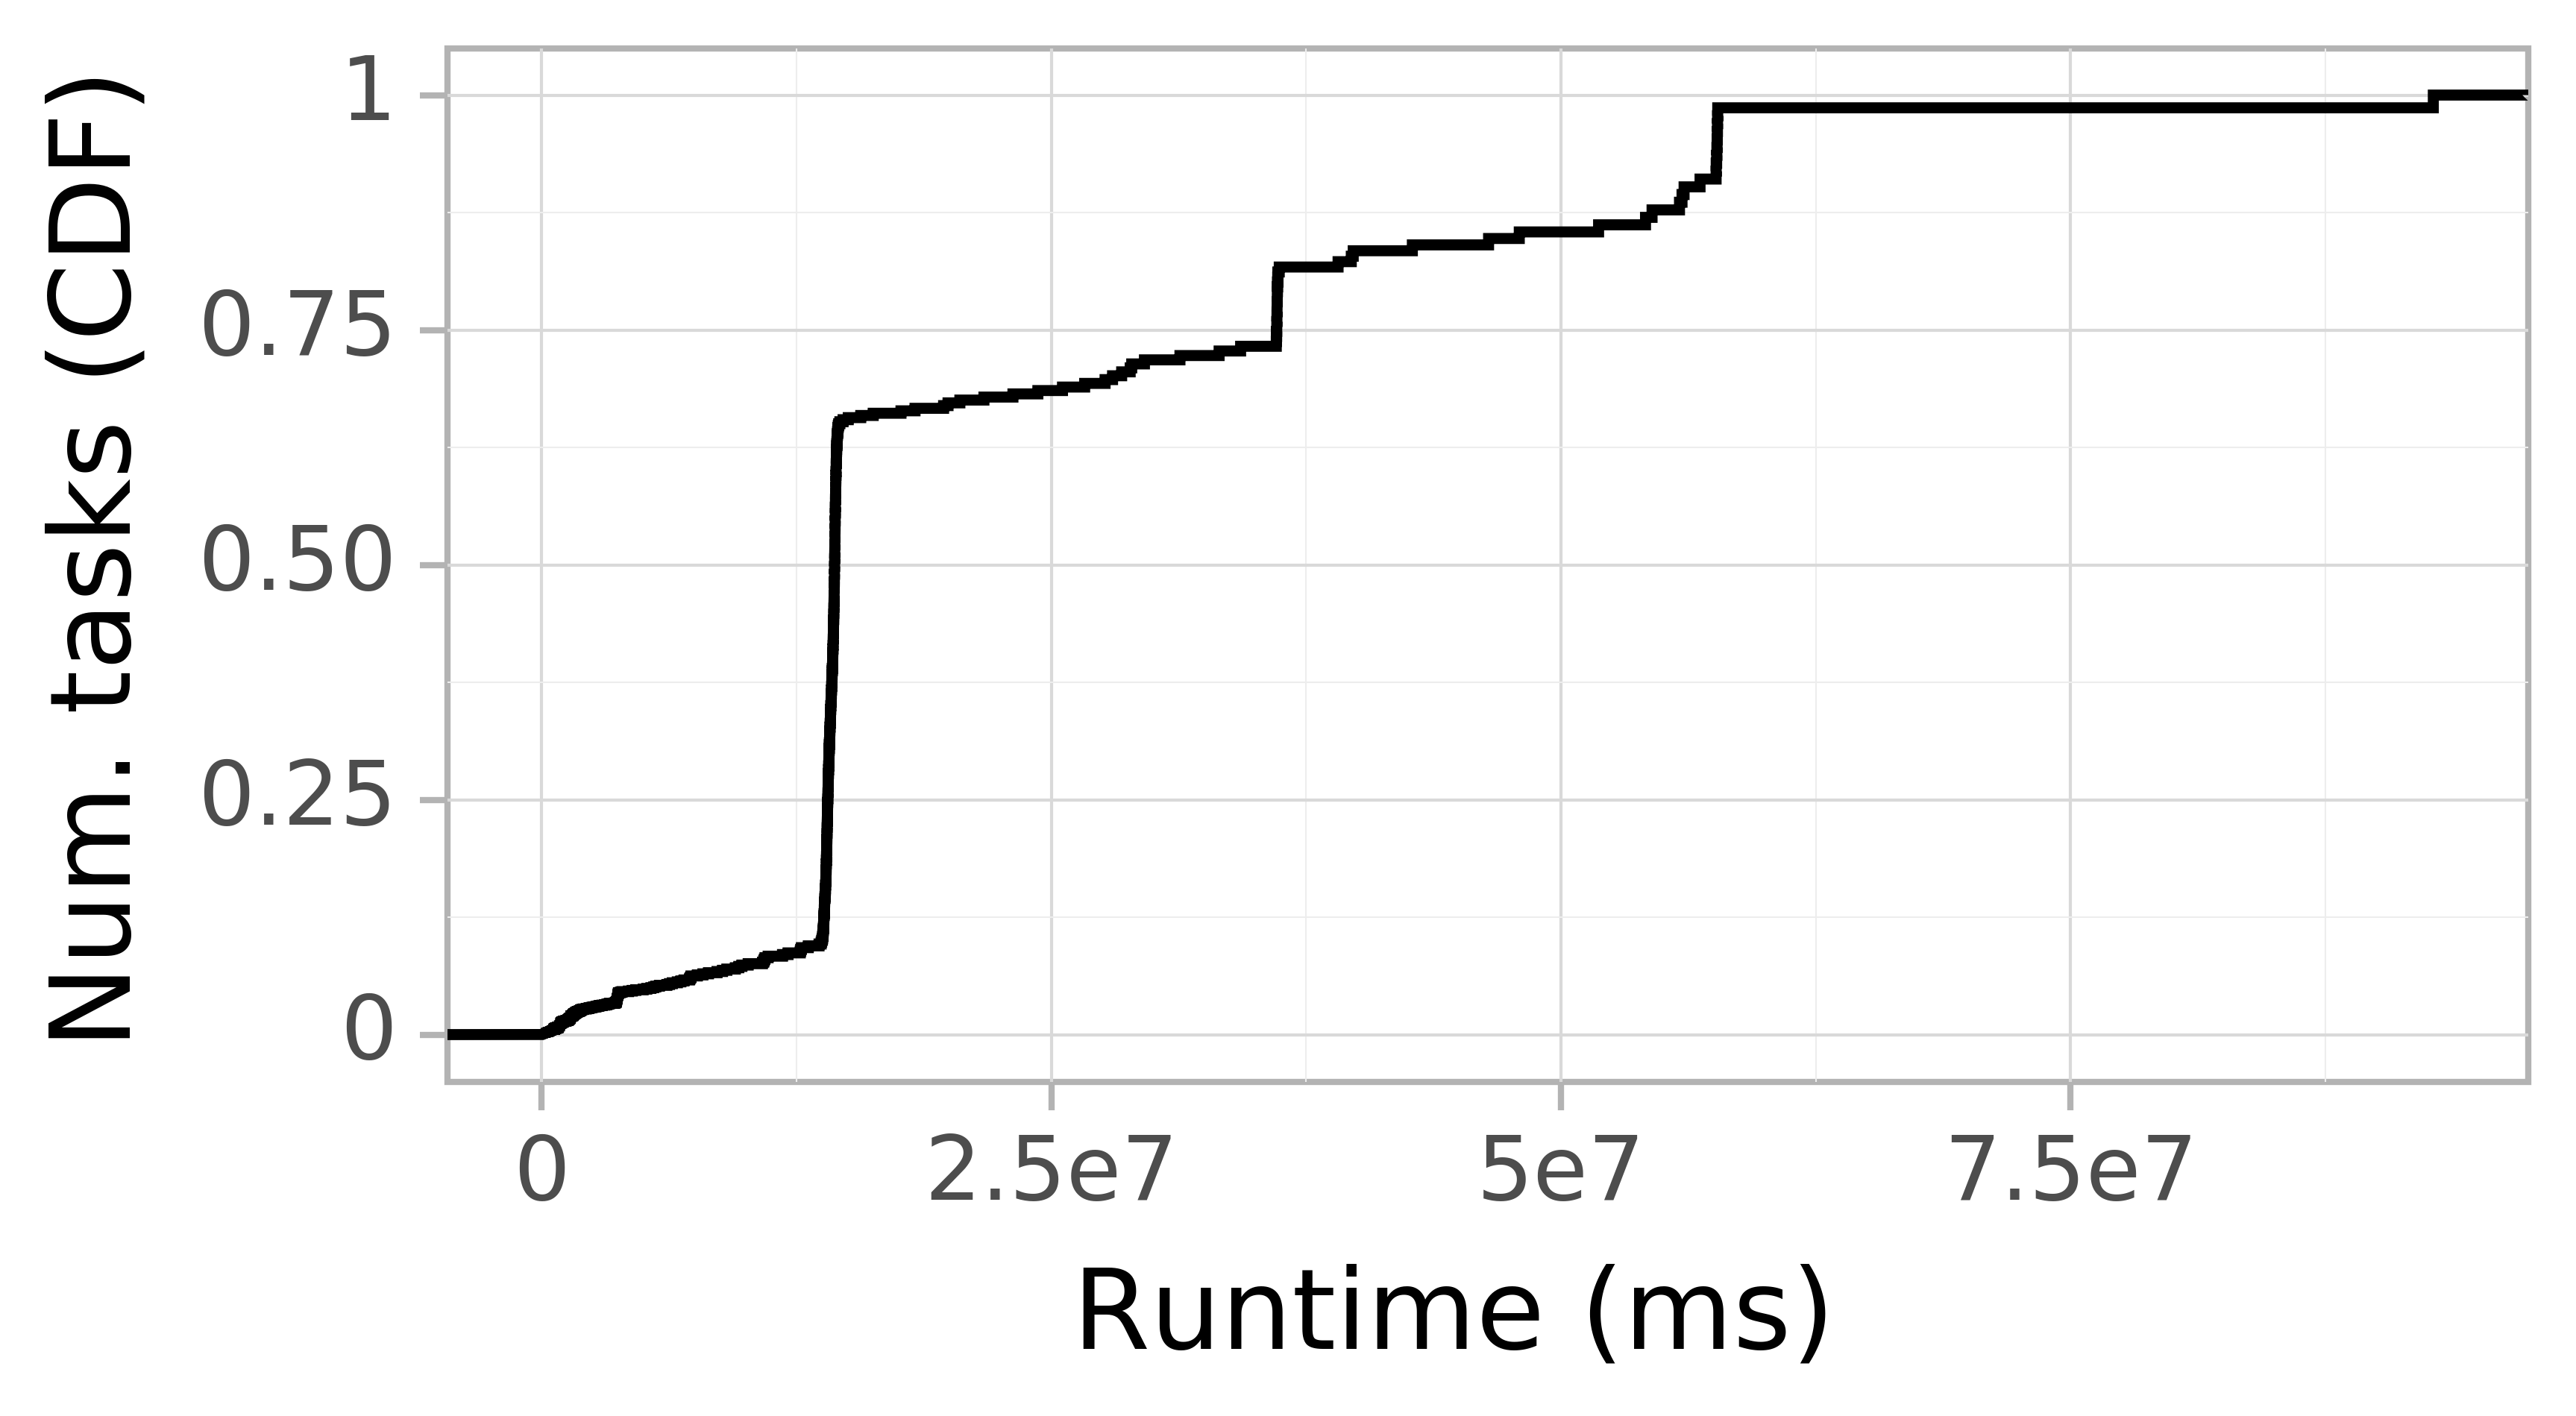 Task runtime CDF graph for the LANL_Trinity trace.